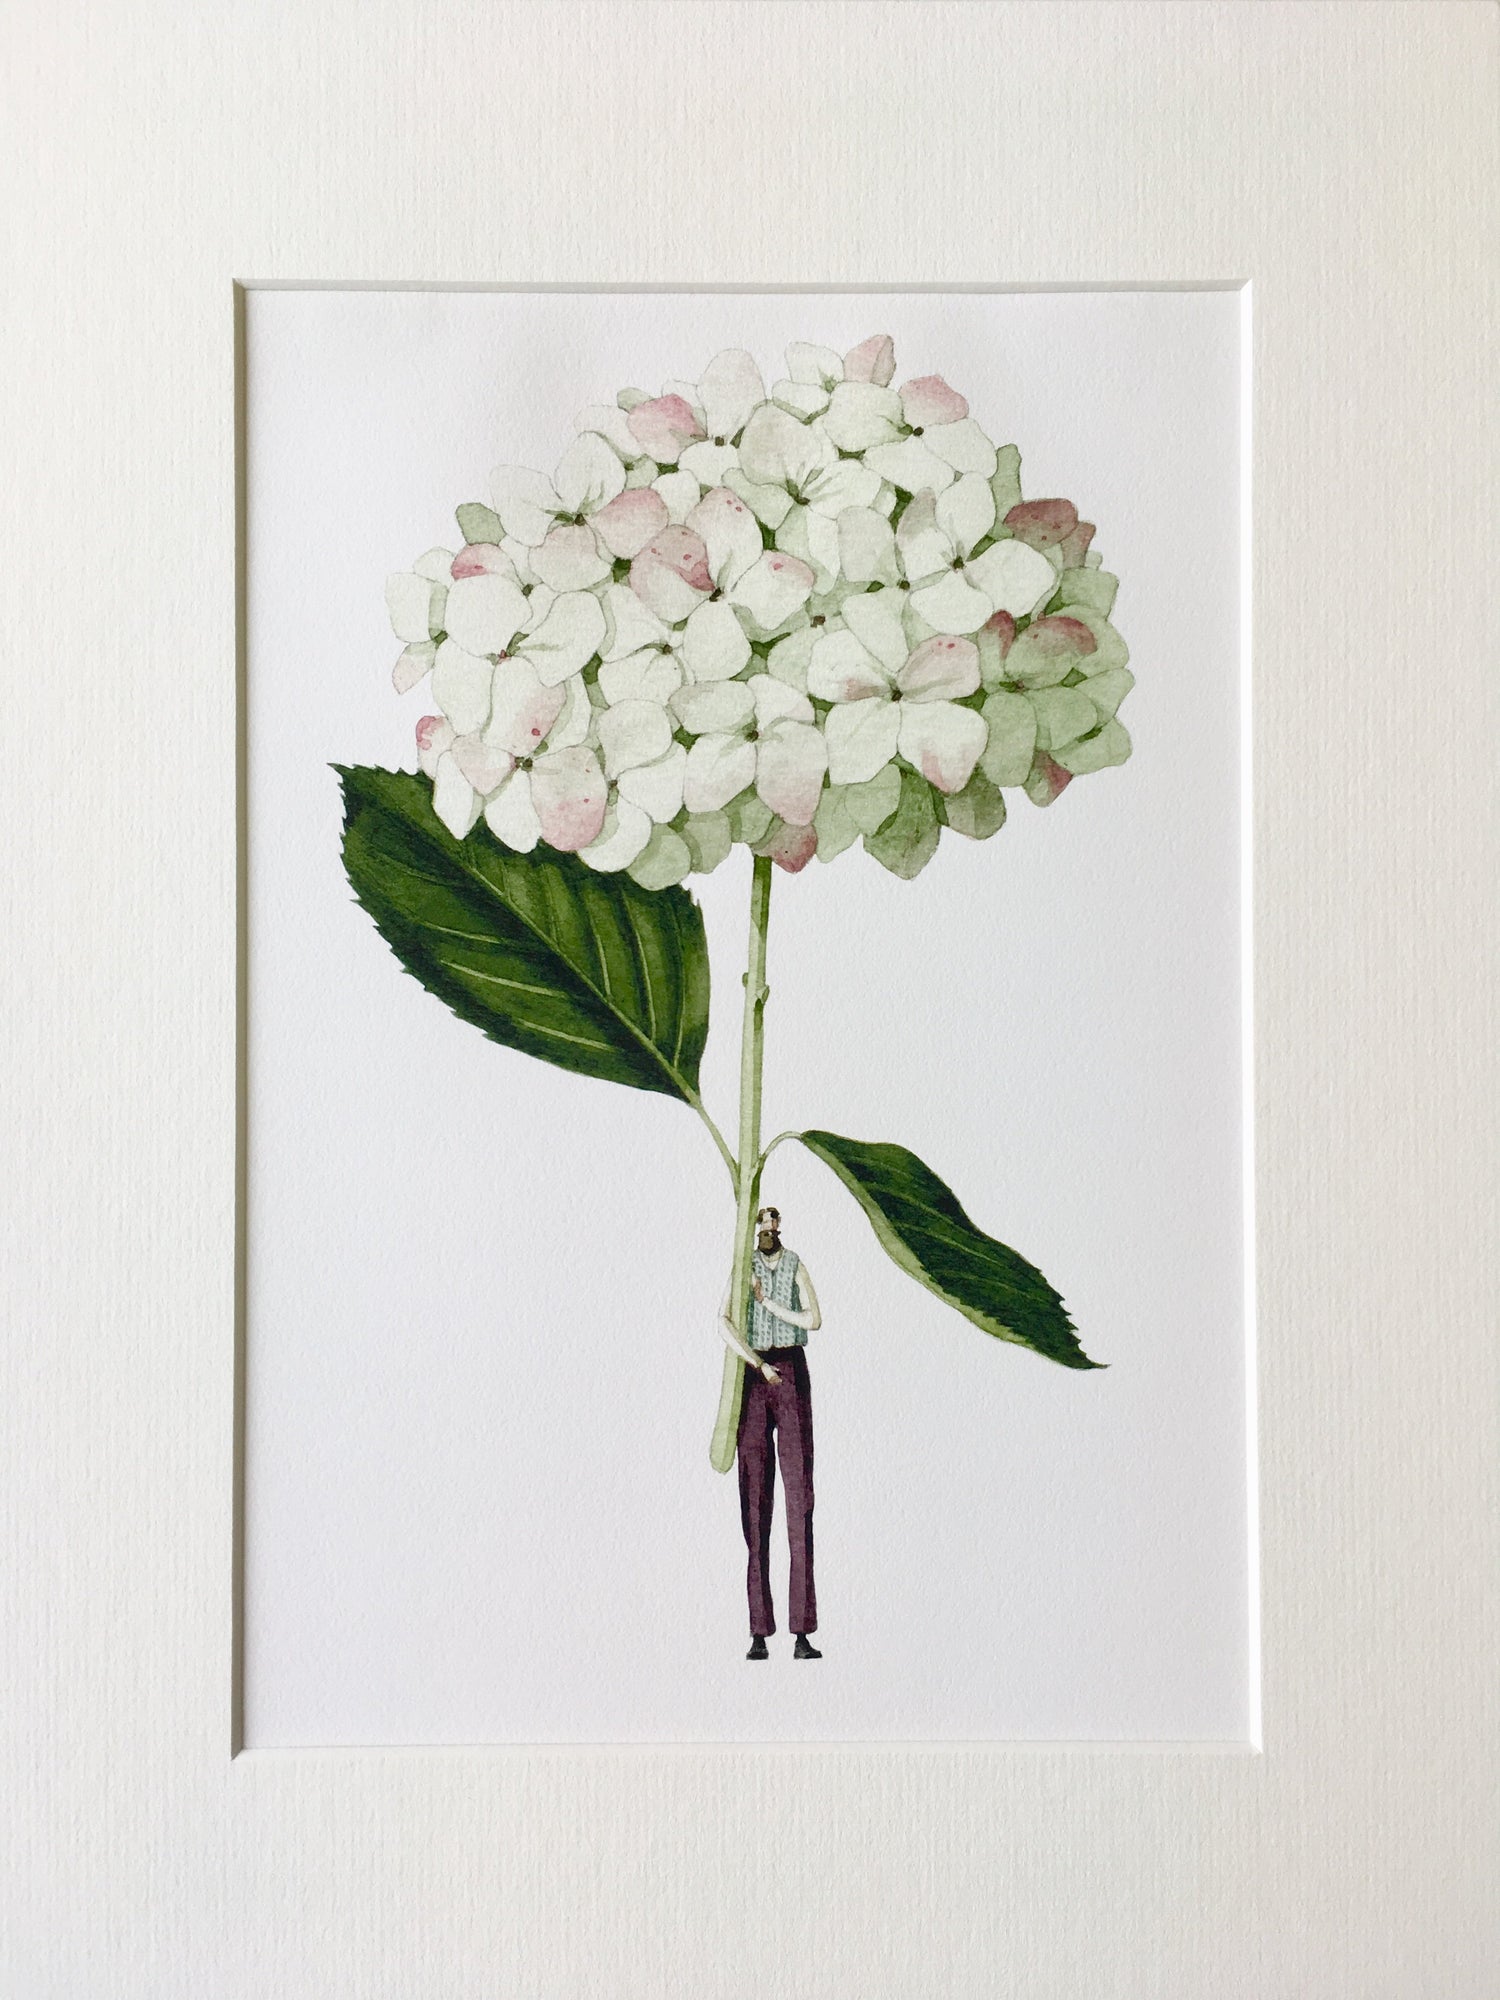 giclee print, mounted print, print, hydrangea, illustration, made in england, green flowers, archival paper, art print